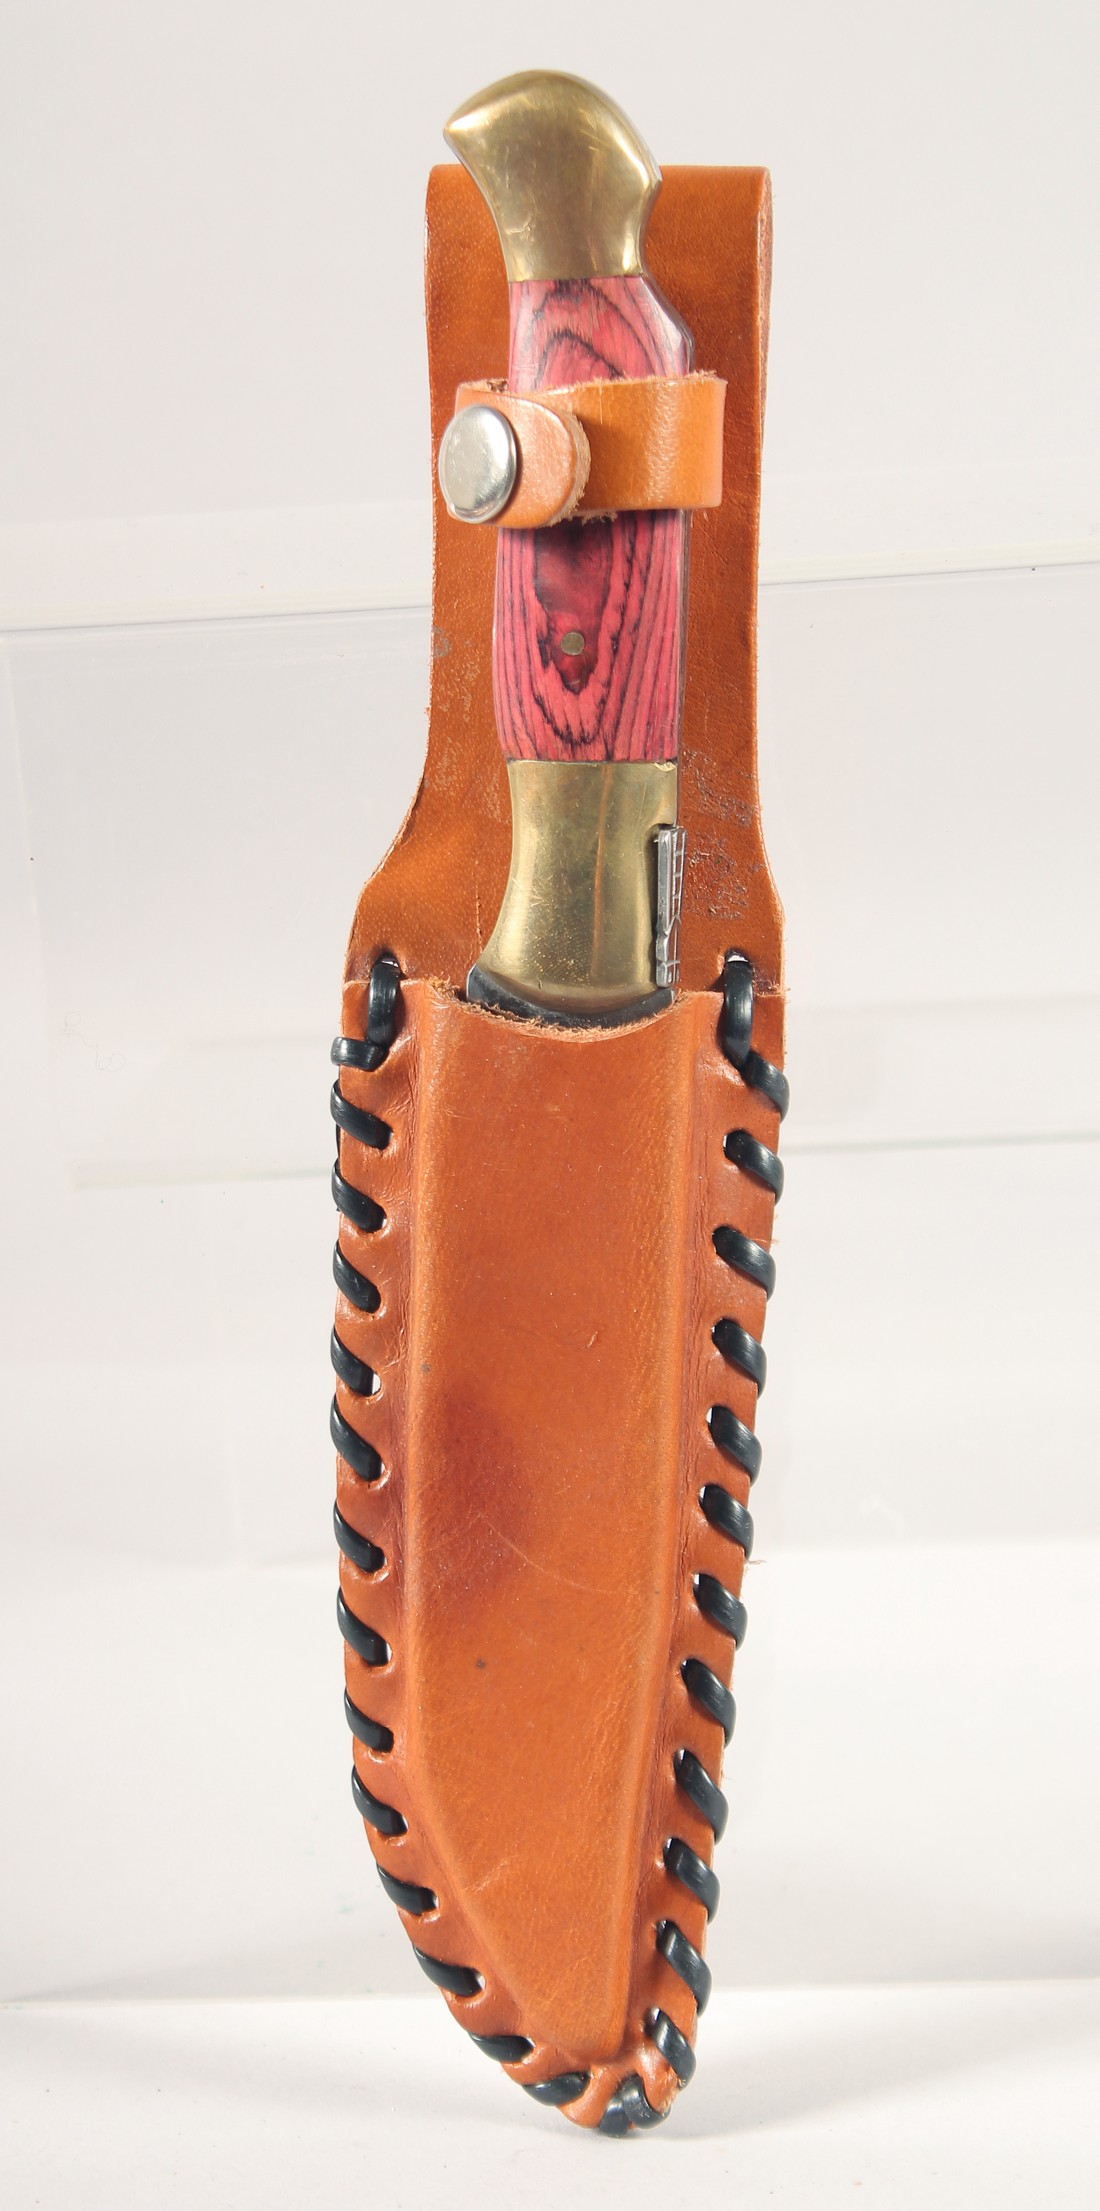 LAGUIOLE, a knife with wooden handle, in a leather sheath, 9.5" long. - Image 5 of 5